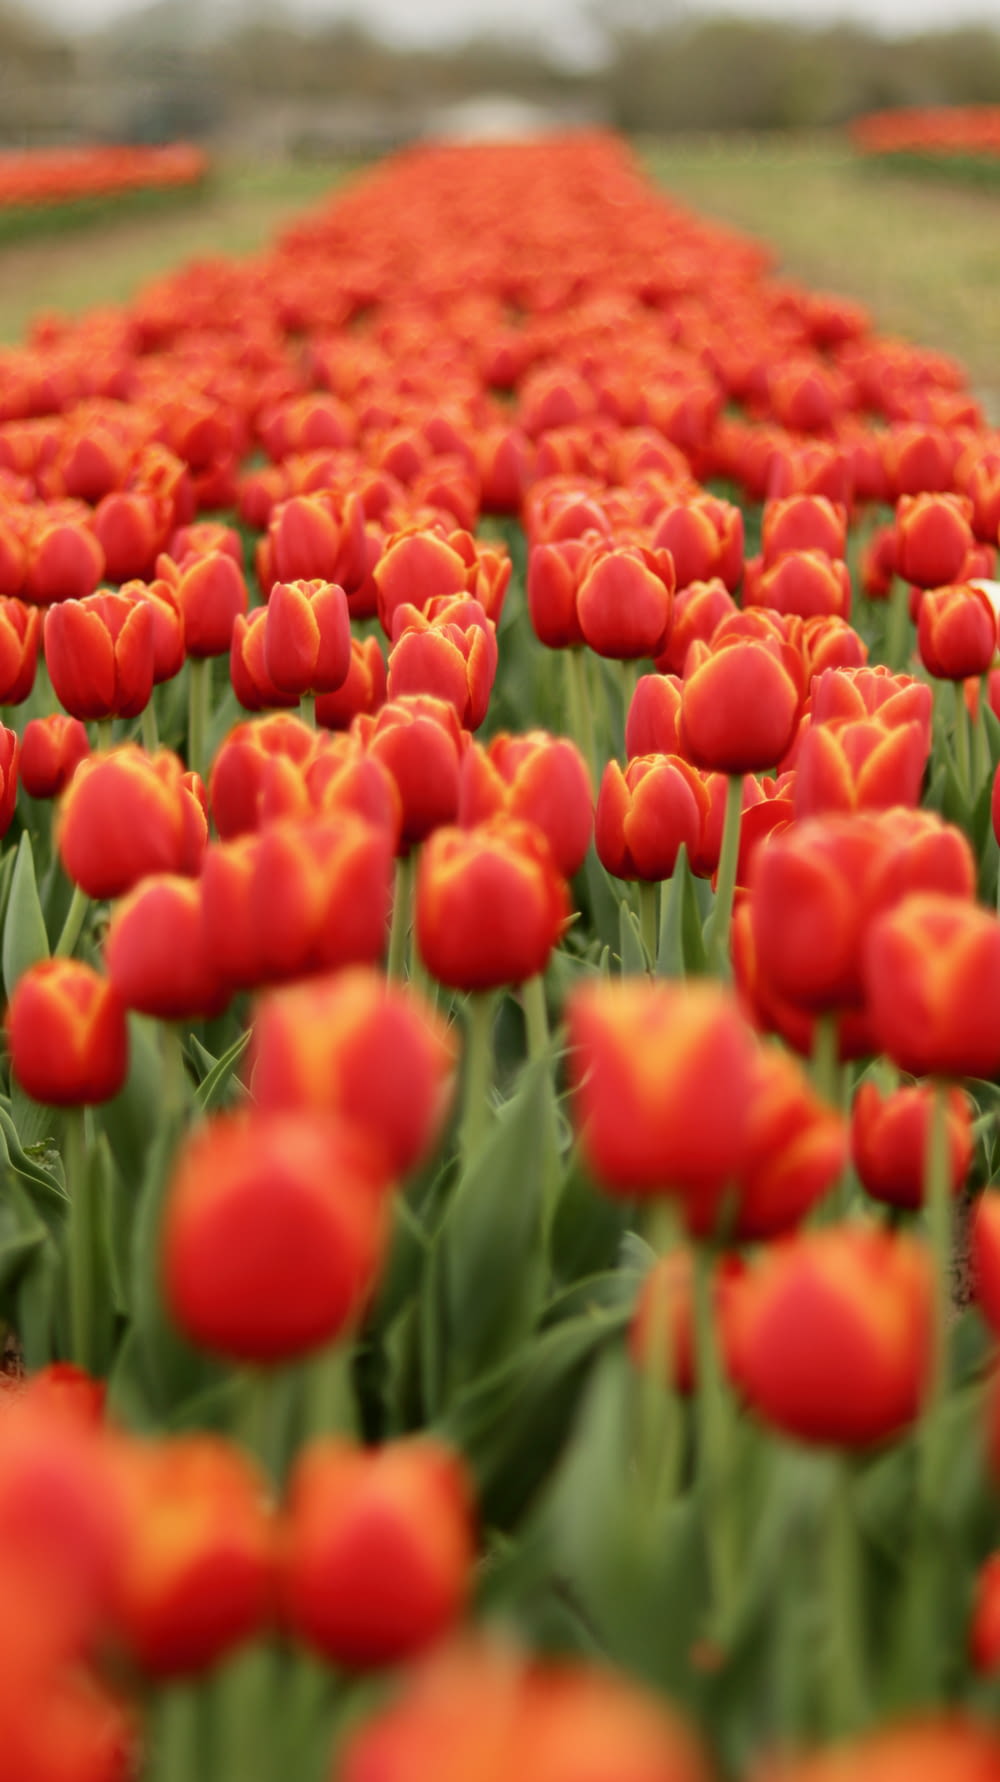 a field full of red and orange tulips